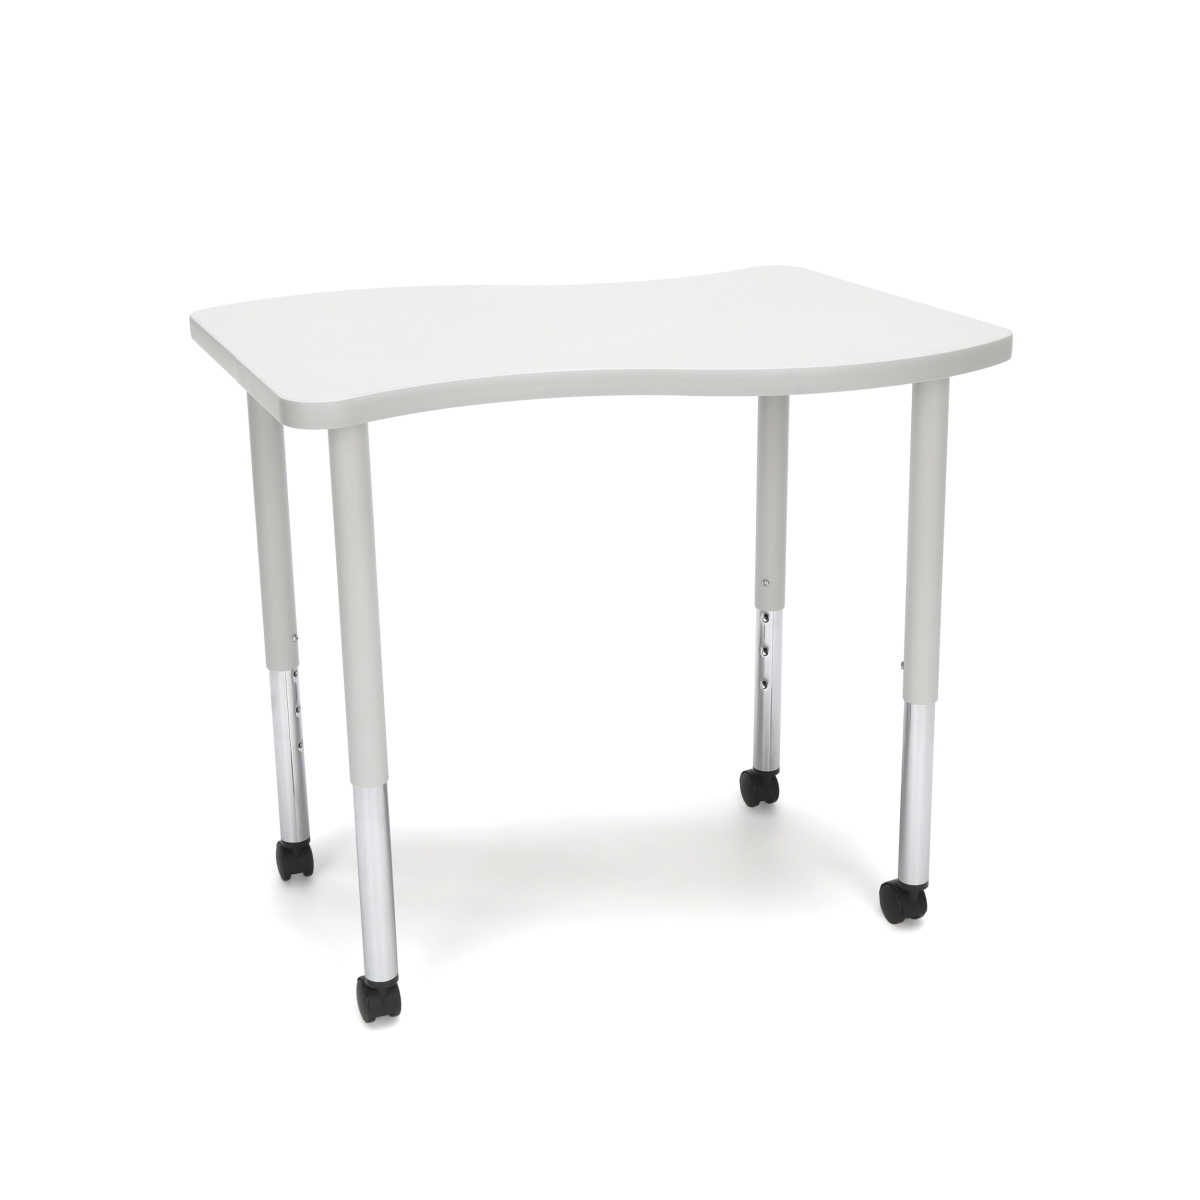 Wave-s-llc-grynb Adapt Series Small Wave Standard Table - 25-33 In. Height Adjustable Desk With Casters, Gray Nebula